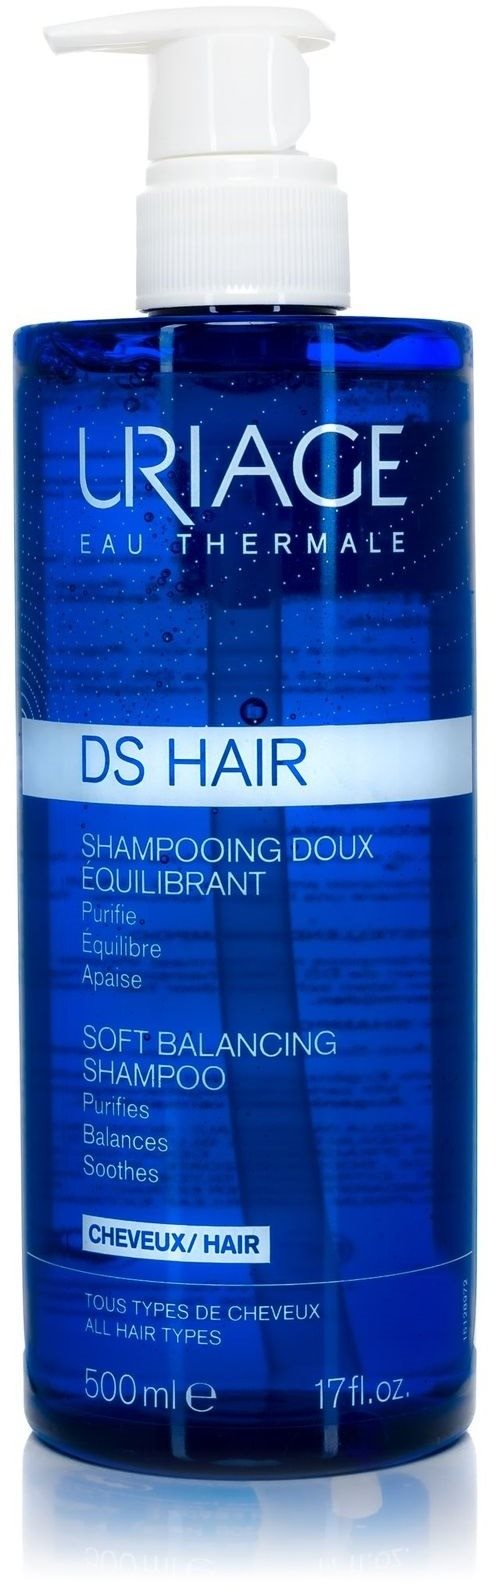 Sampon URIAGE D.S. Hair Equilibrant 500 ml